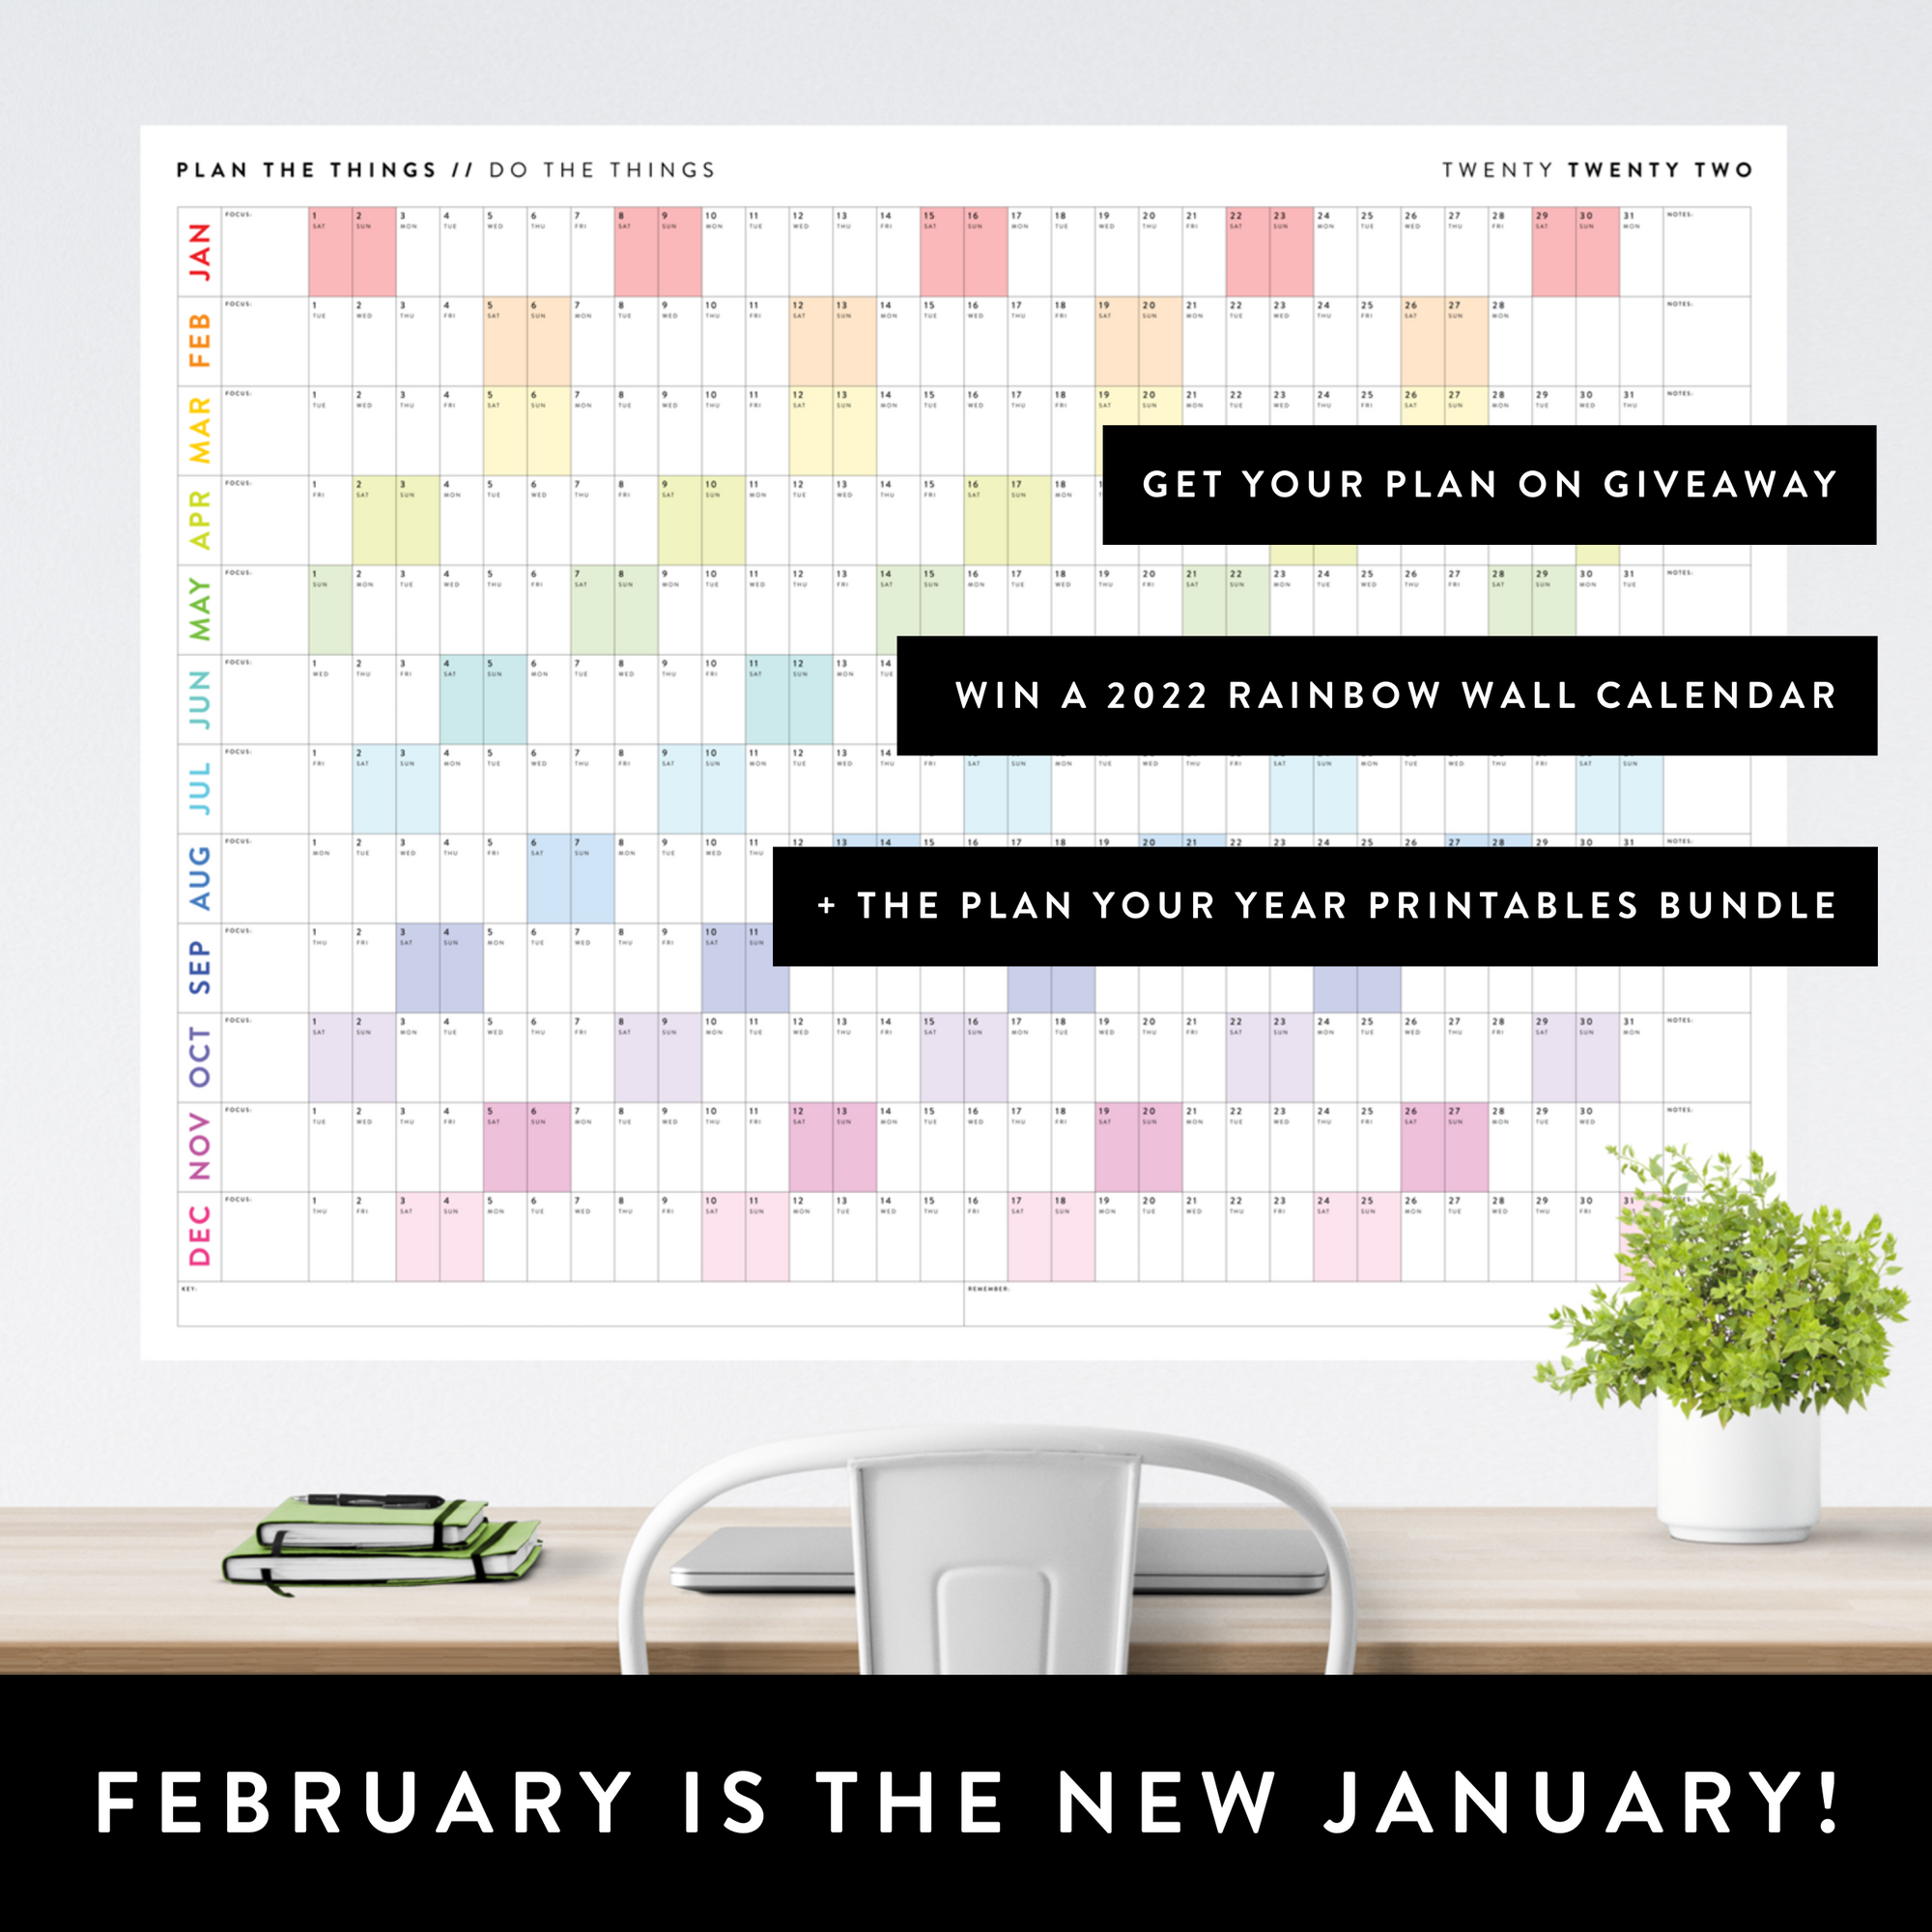 FEBRUARY IS THE NEW JANUARY - GET YOUR PLAN ON GIVEAWAY!